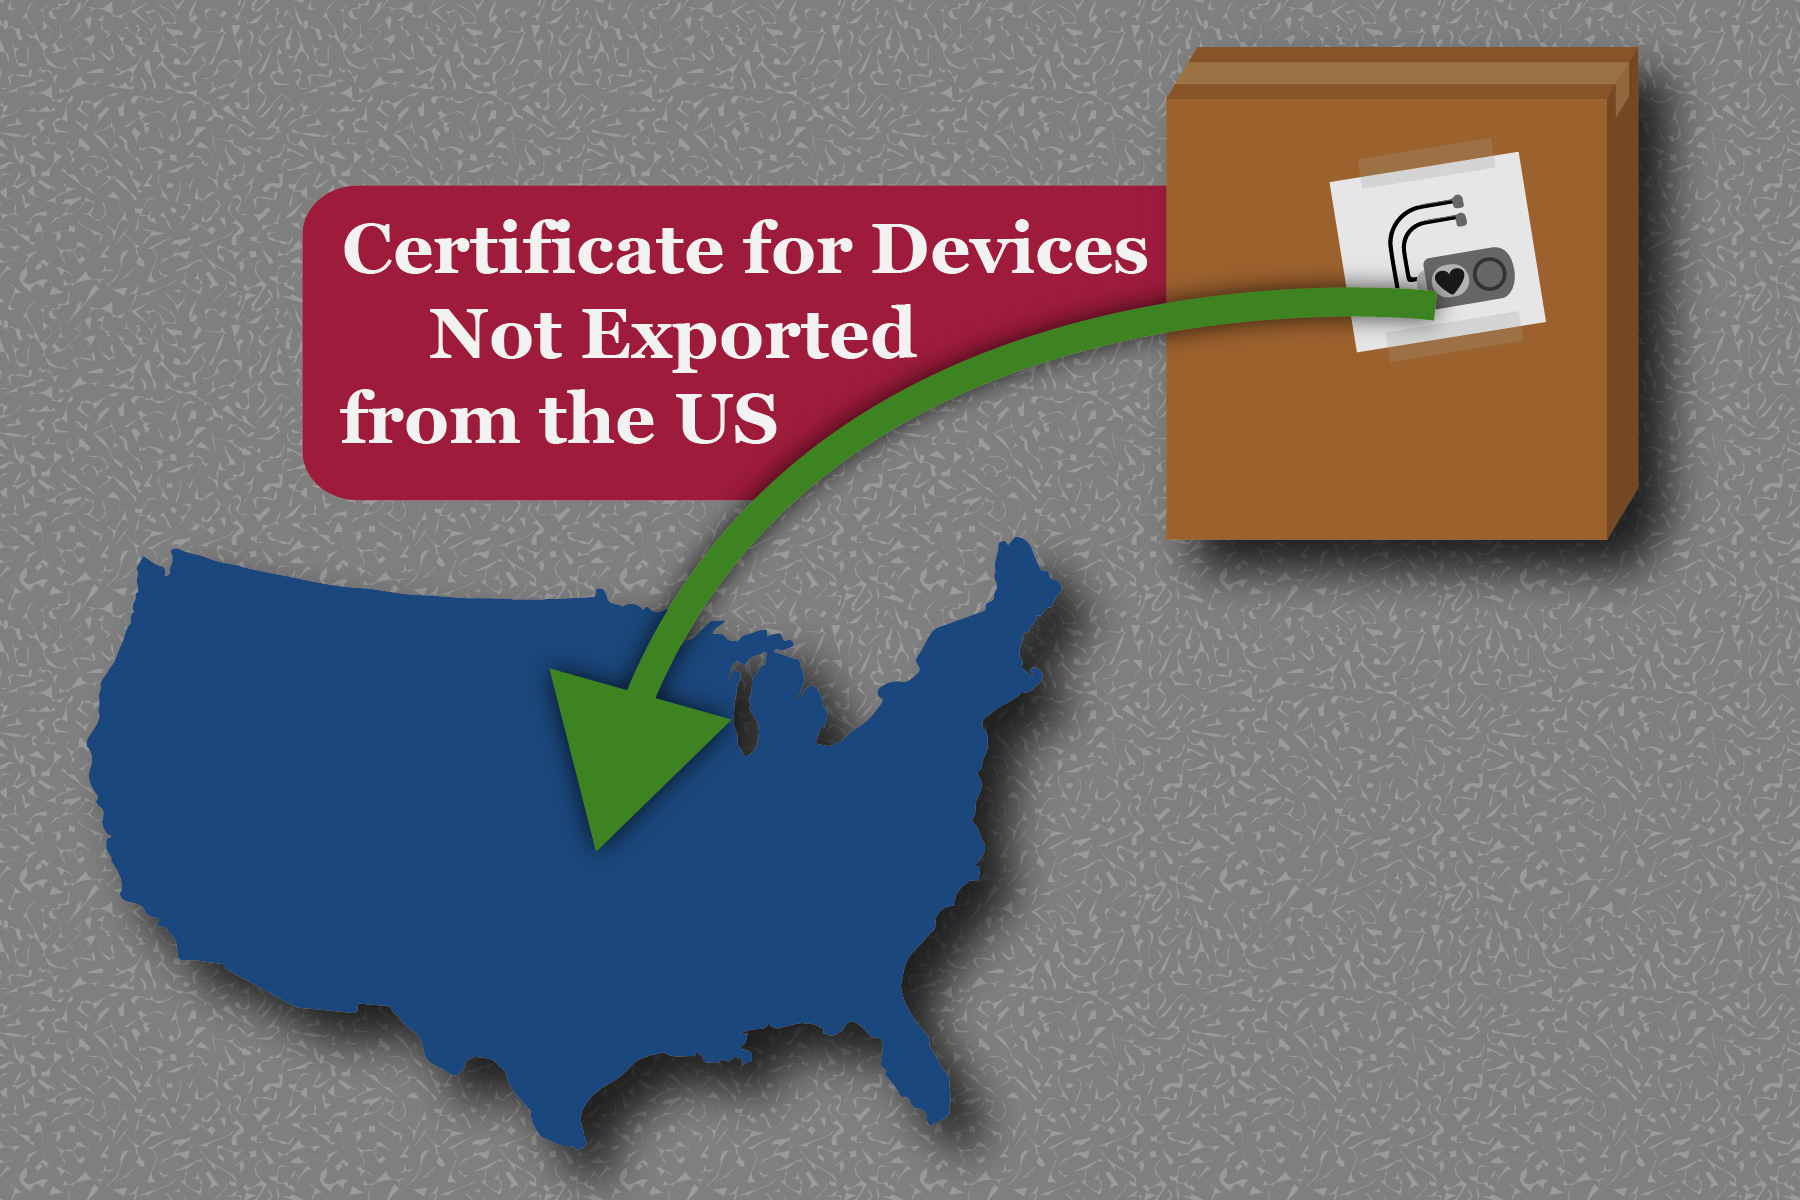 Certificate for Devices Not Exported from the US